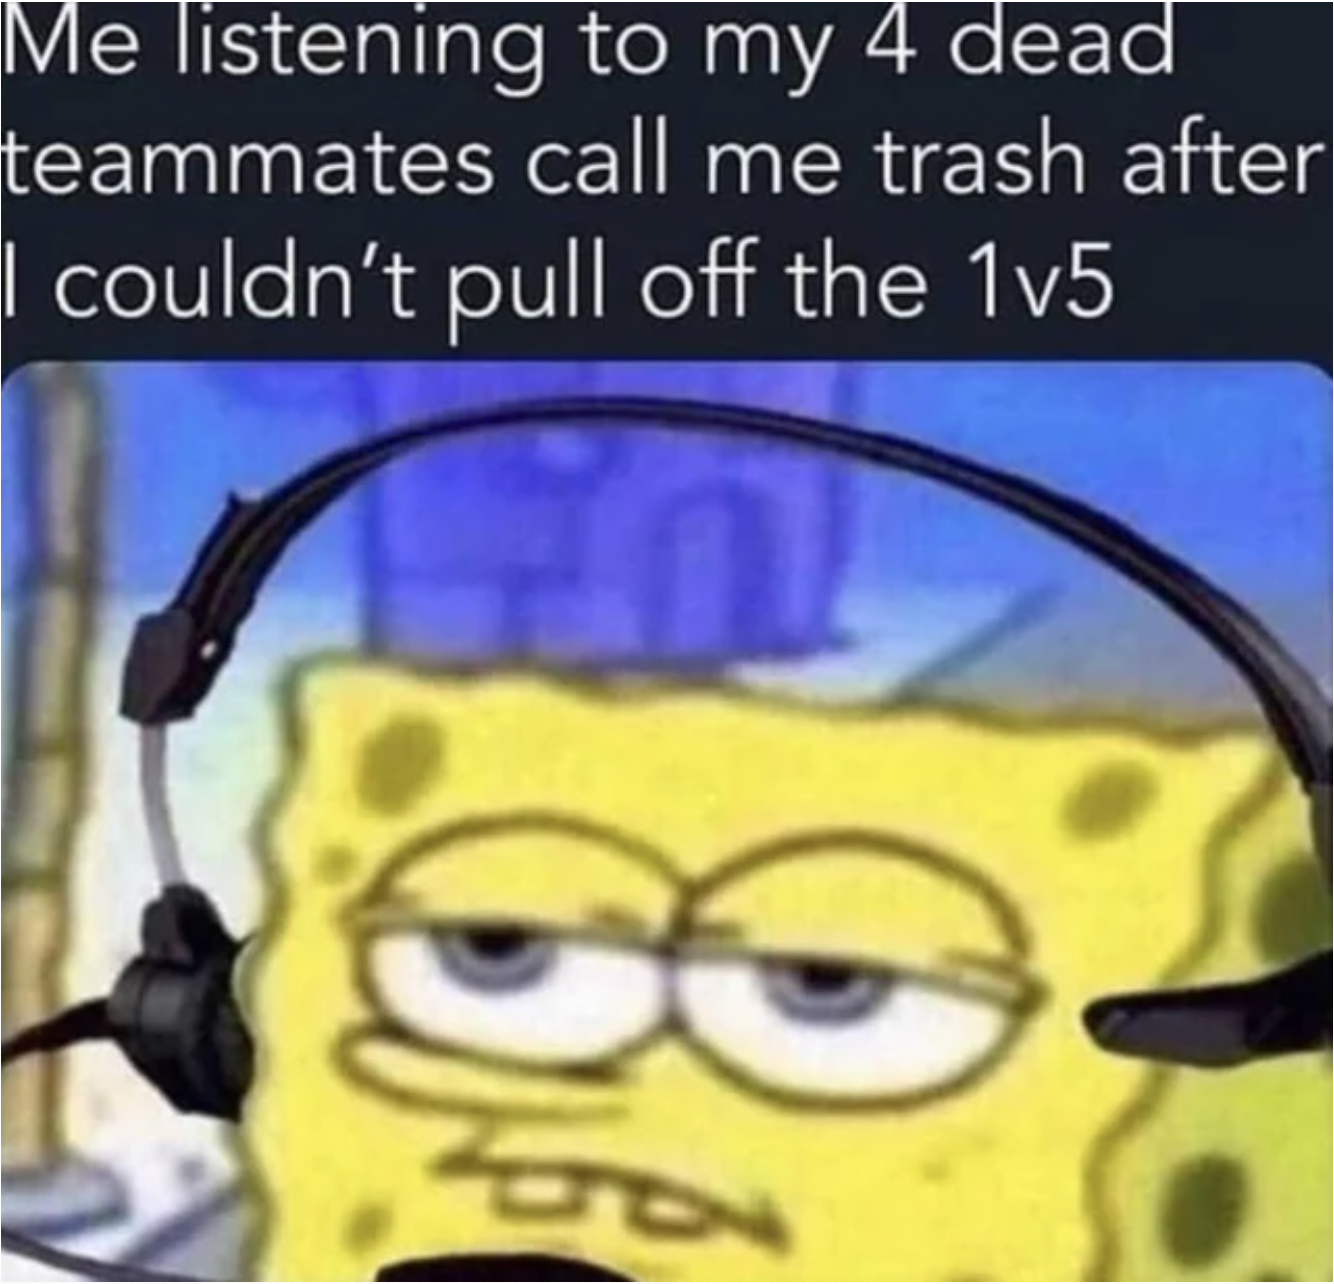 Gaming Memes - you tell a whole story and forget - Me listening to my 4 dead teammates I couldn't pull off the 1v5 call me trash after